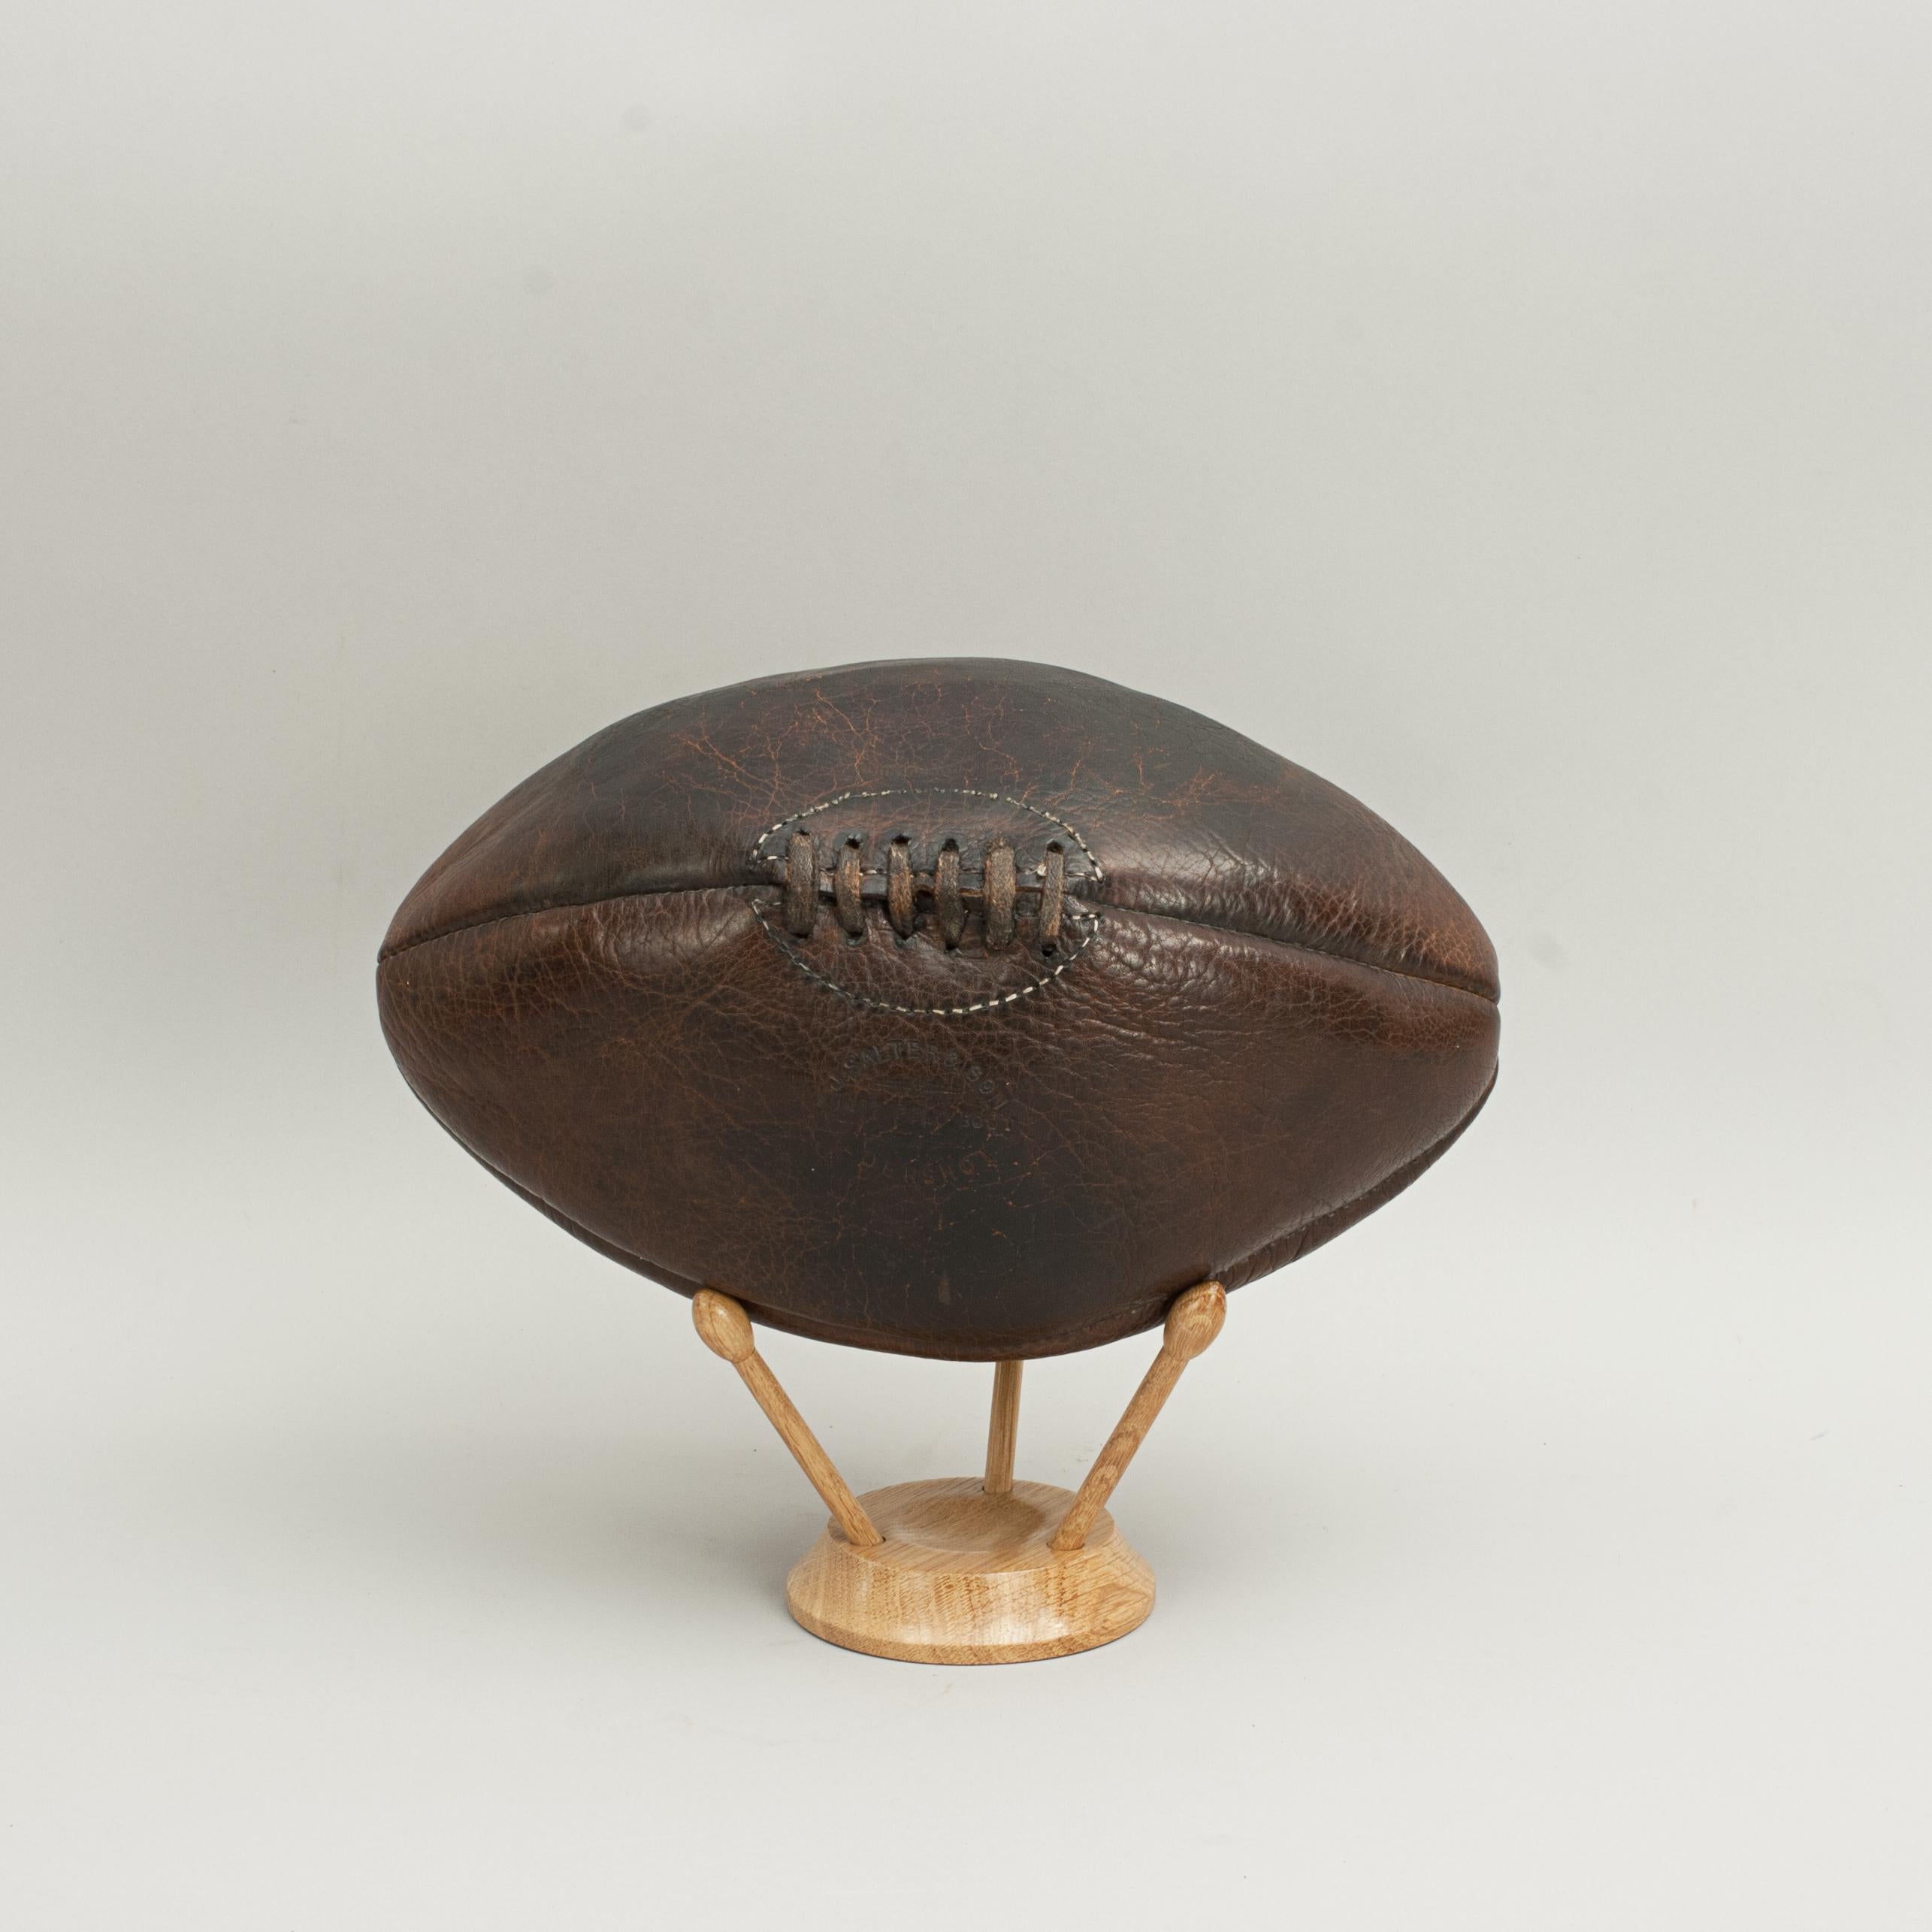 Oak ball stands.
Modern wooden ball stands, ideal for rugby or football balls. The rugby ball can be displayed standing up or on its side. A great way to display your prized balls.

The price shown is for the stand only, the balls in the